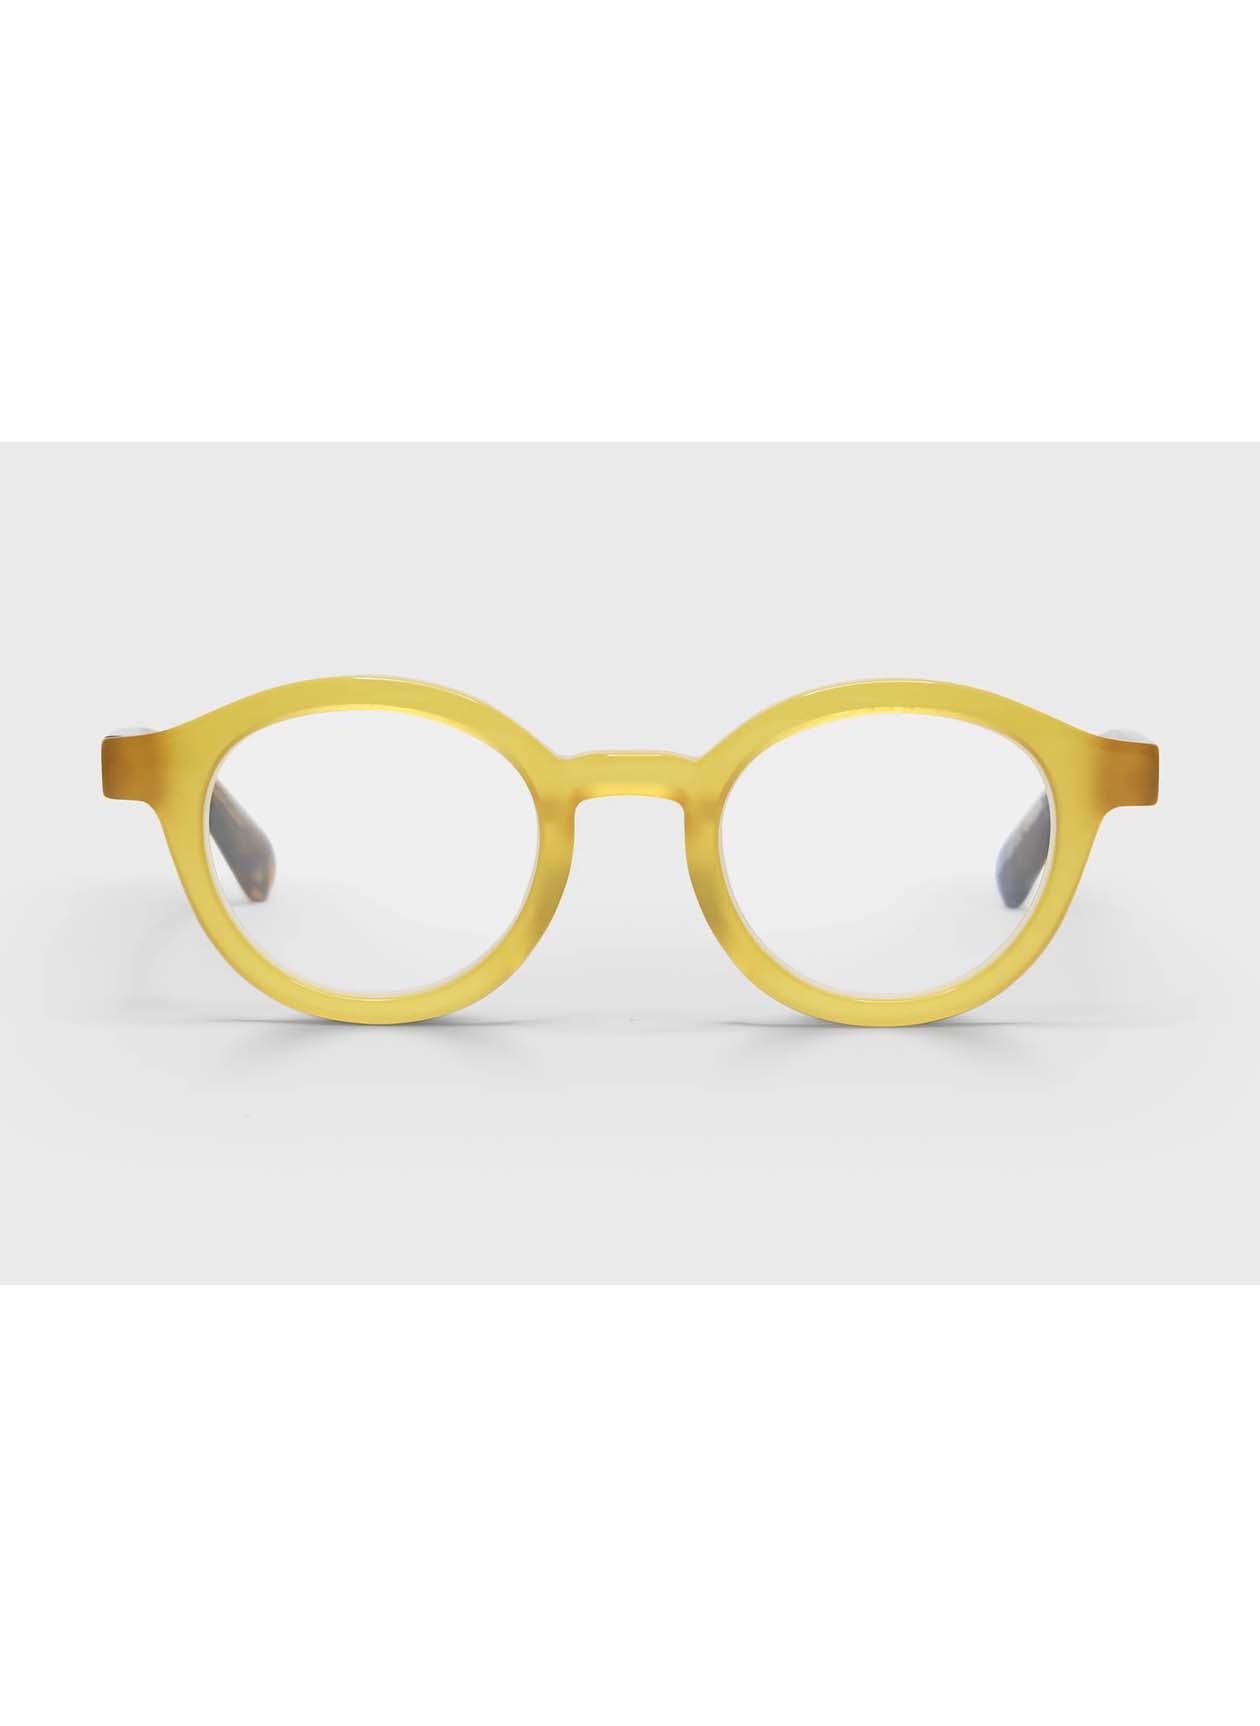 TV PARTY READERS - YELLOW/BLUE/BROWN